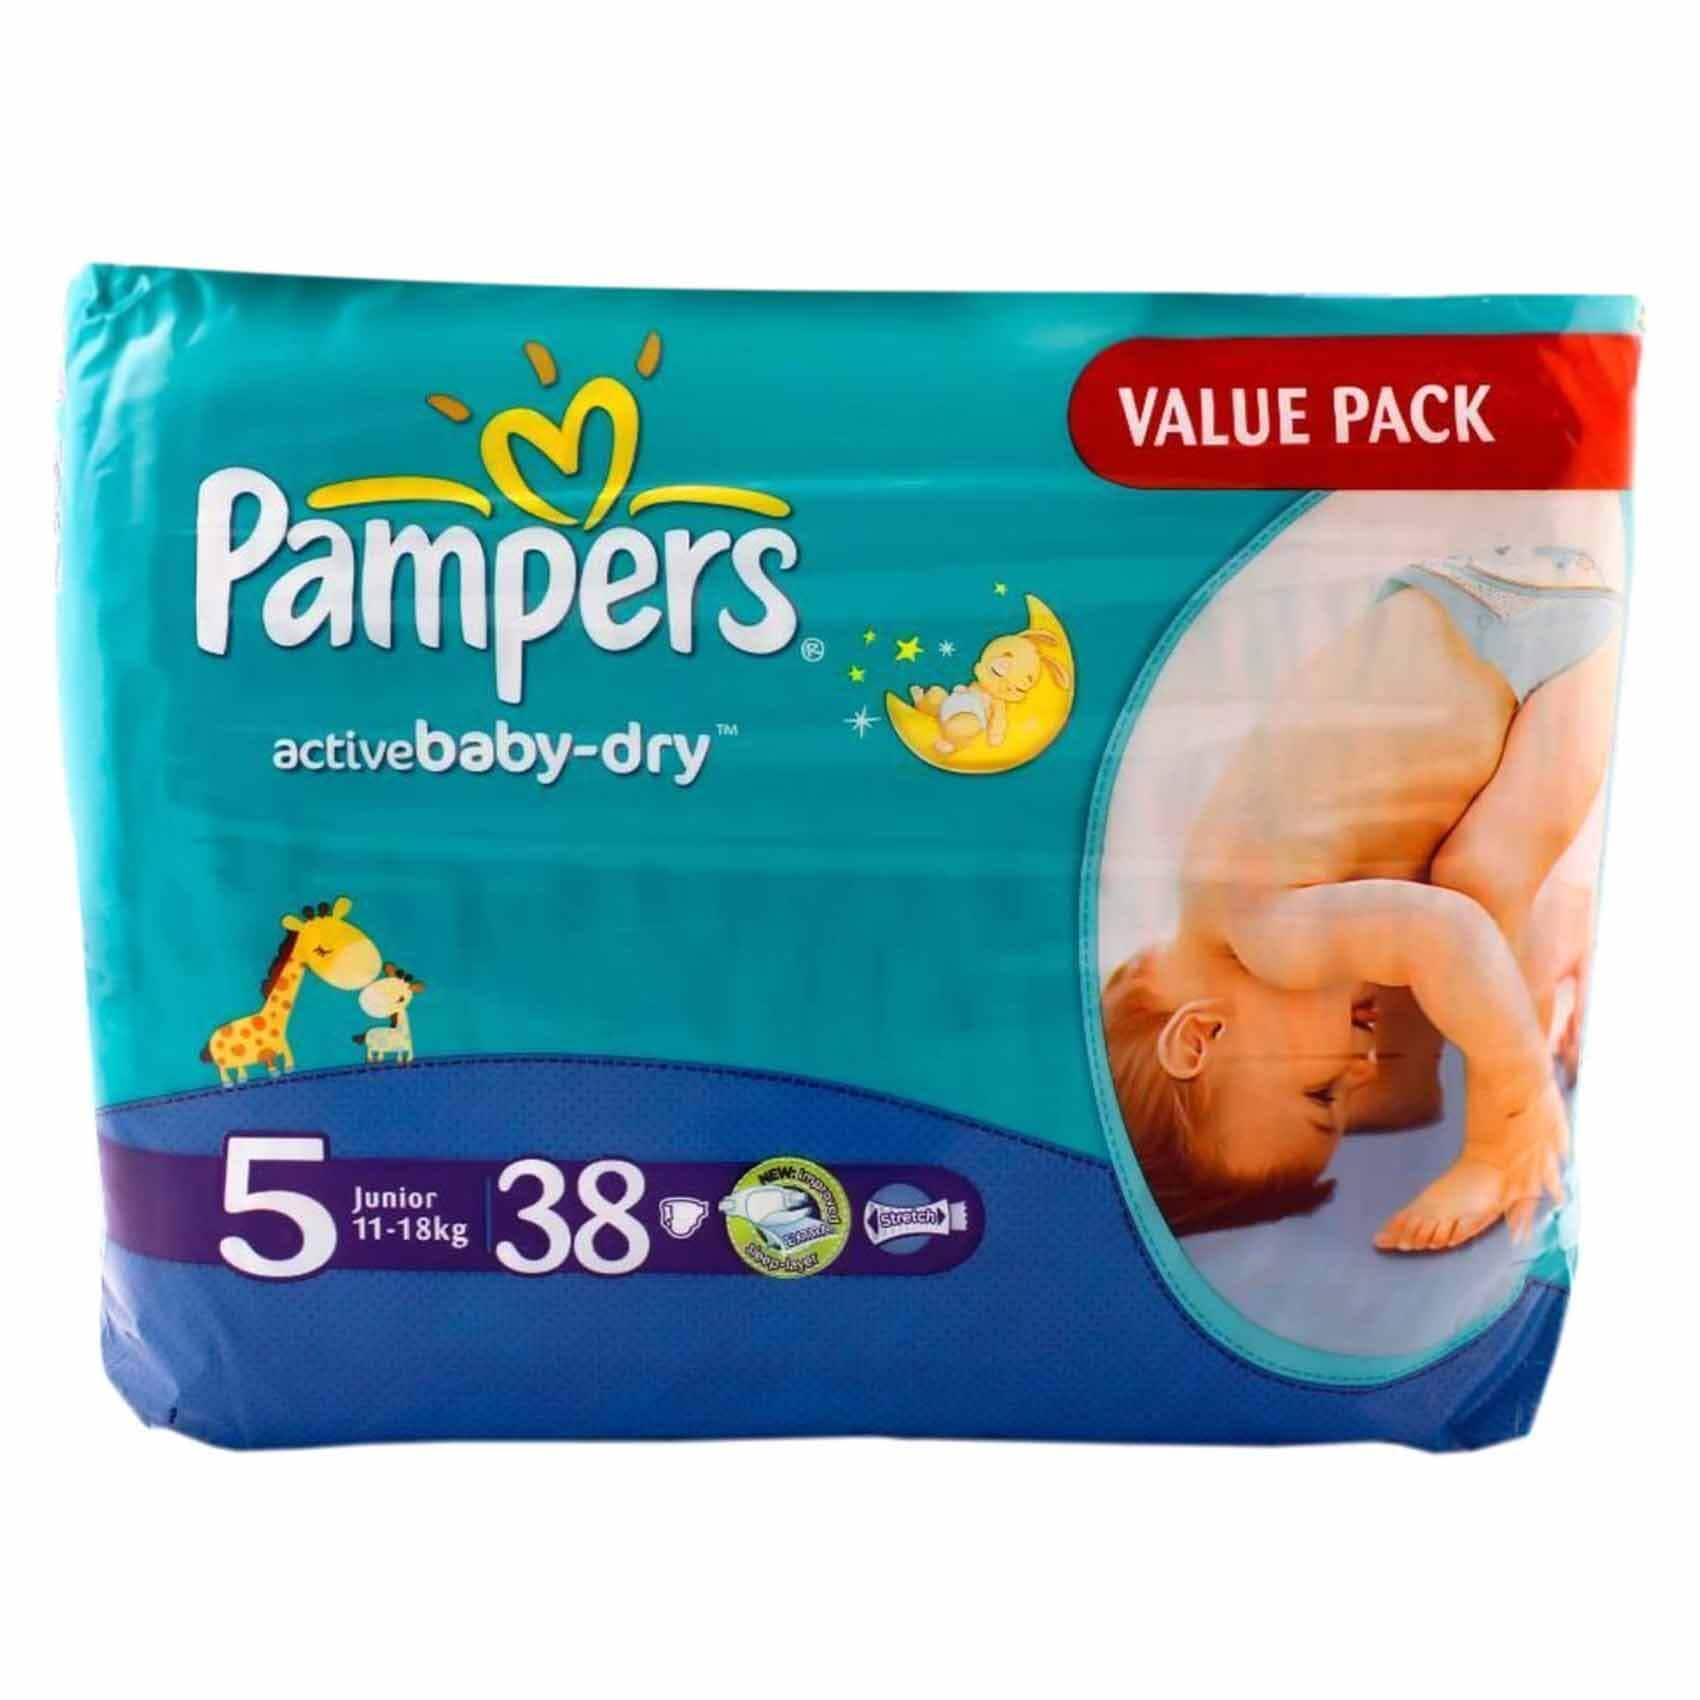 Buy Pampers Baby Dry Diapers Value Pack Junior Size 5 38 Count 11